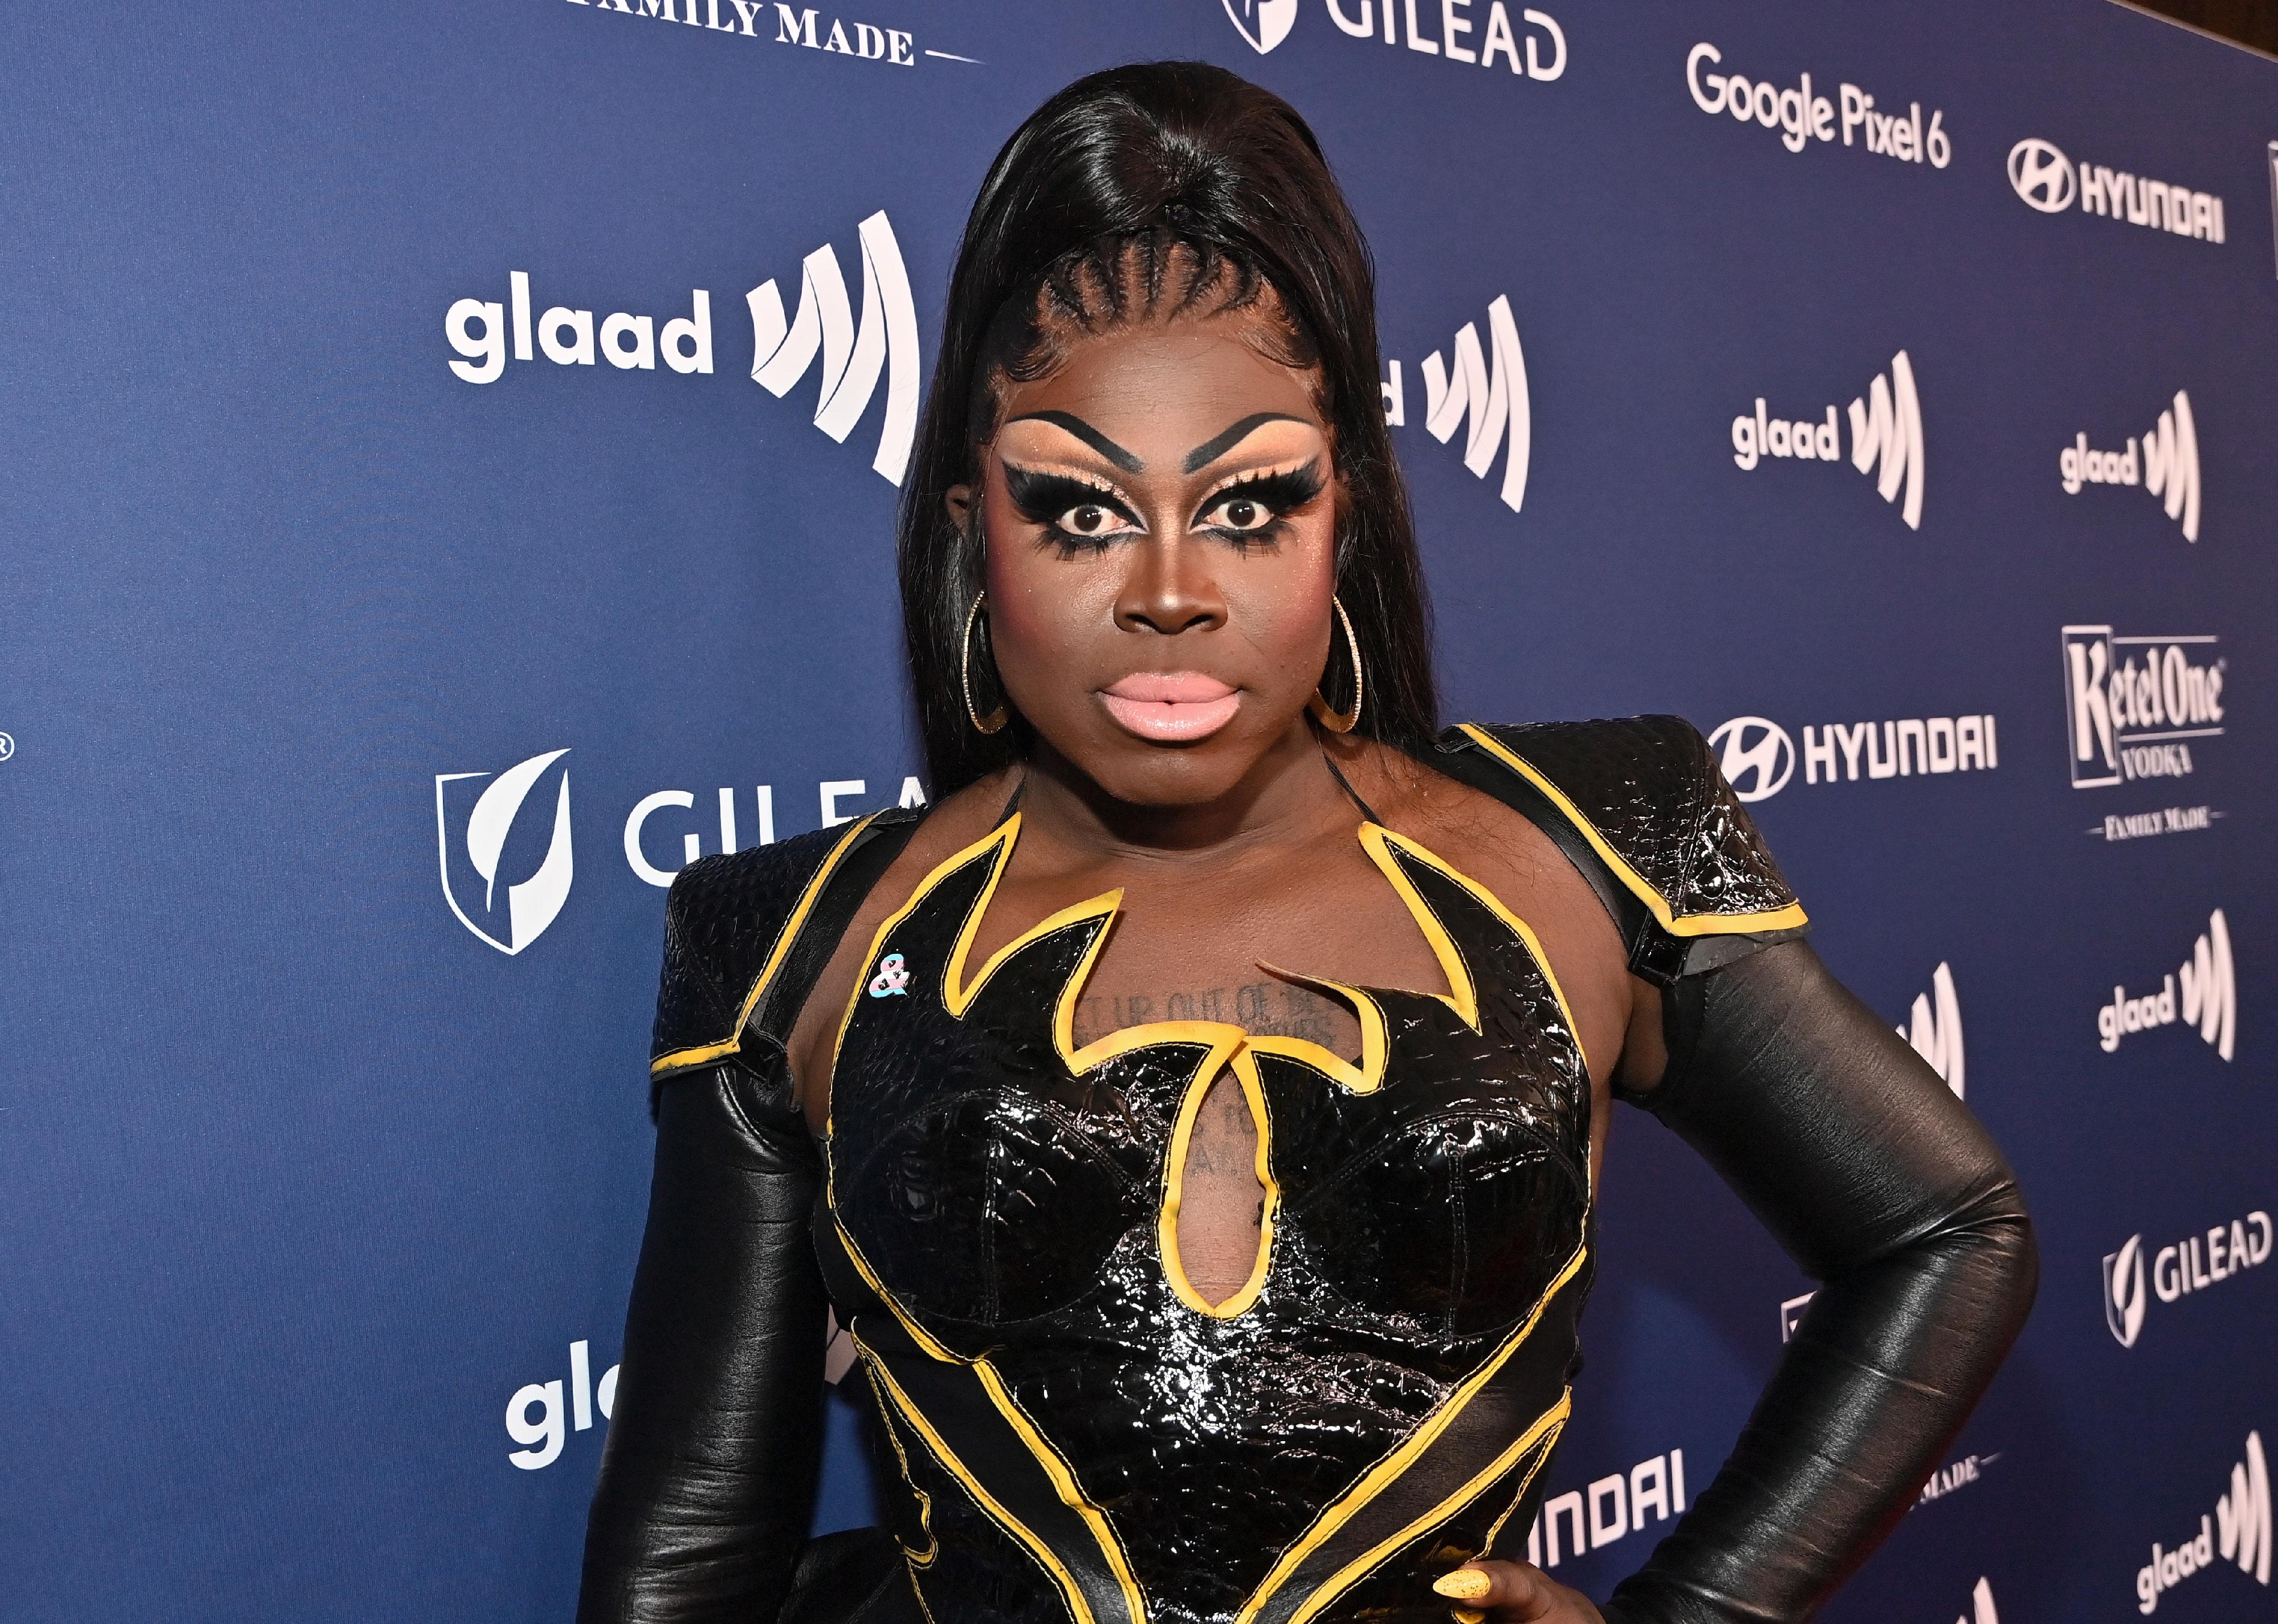 Bob the Drag Queen attends The 33rd Annual GLAAD Media Awards.